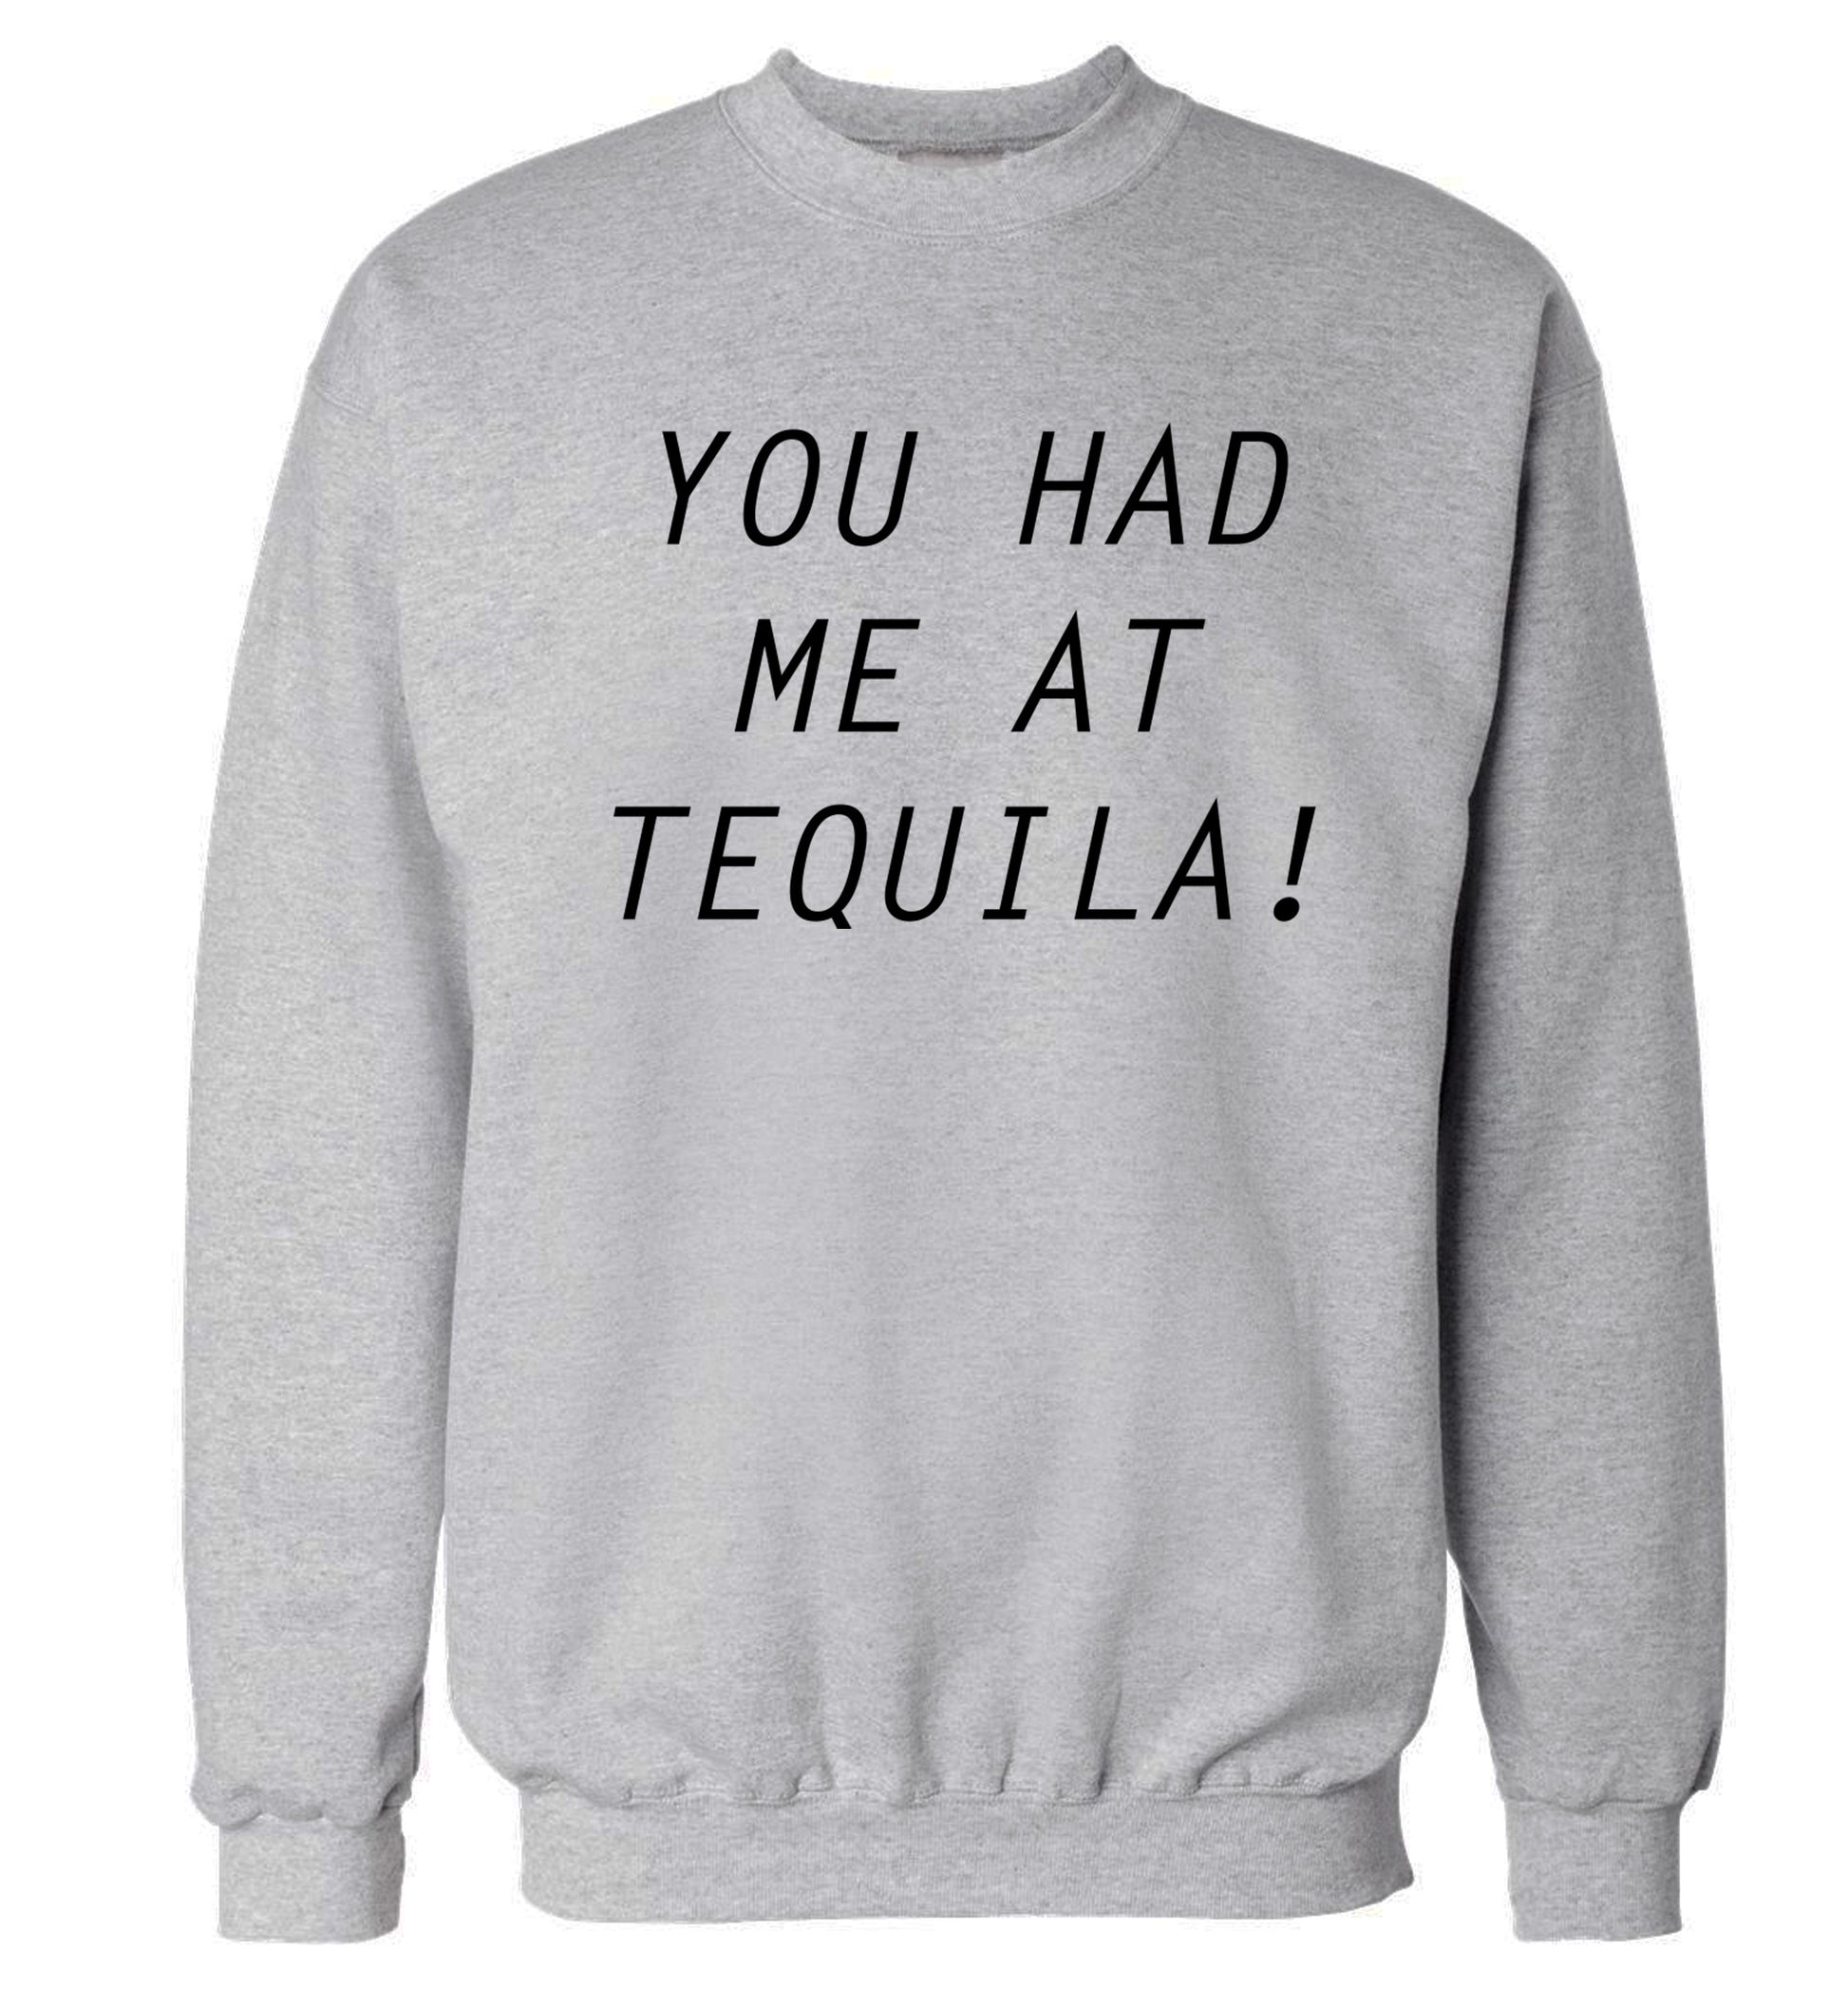 You had me at tequila Adult's unisex grey Sweater 2XL